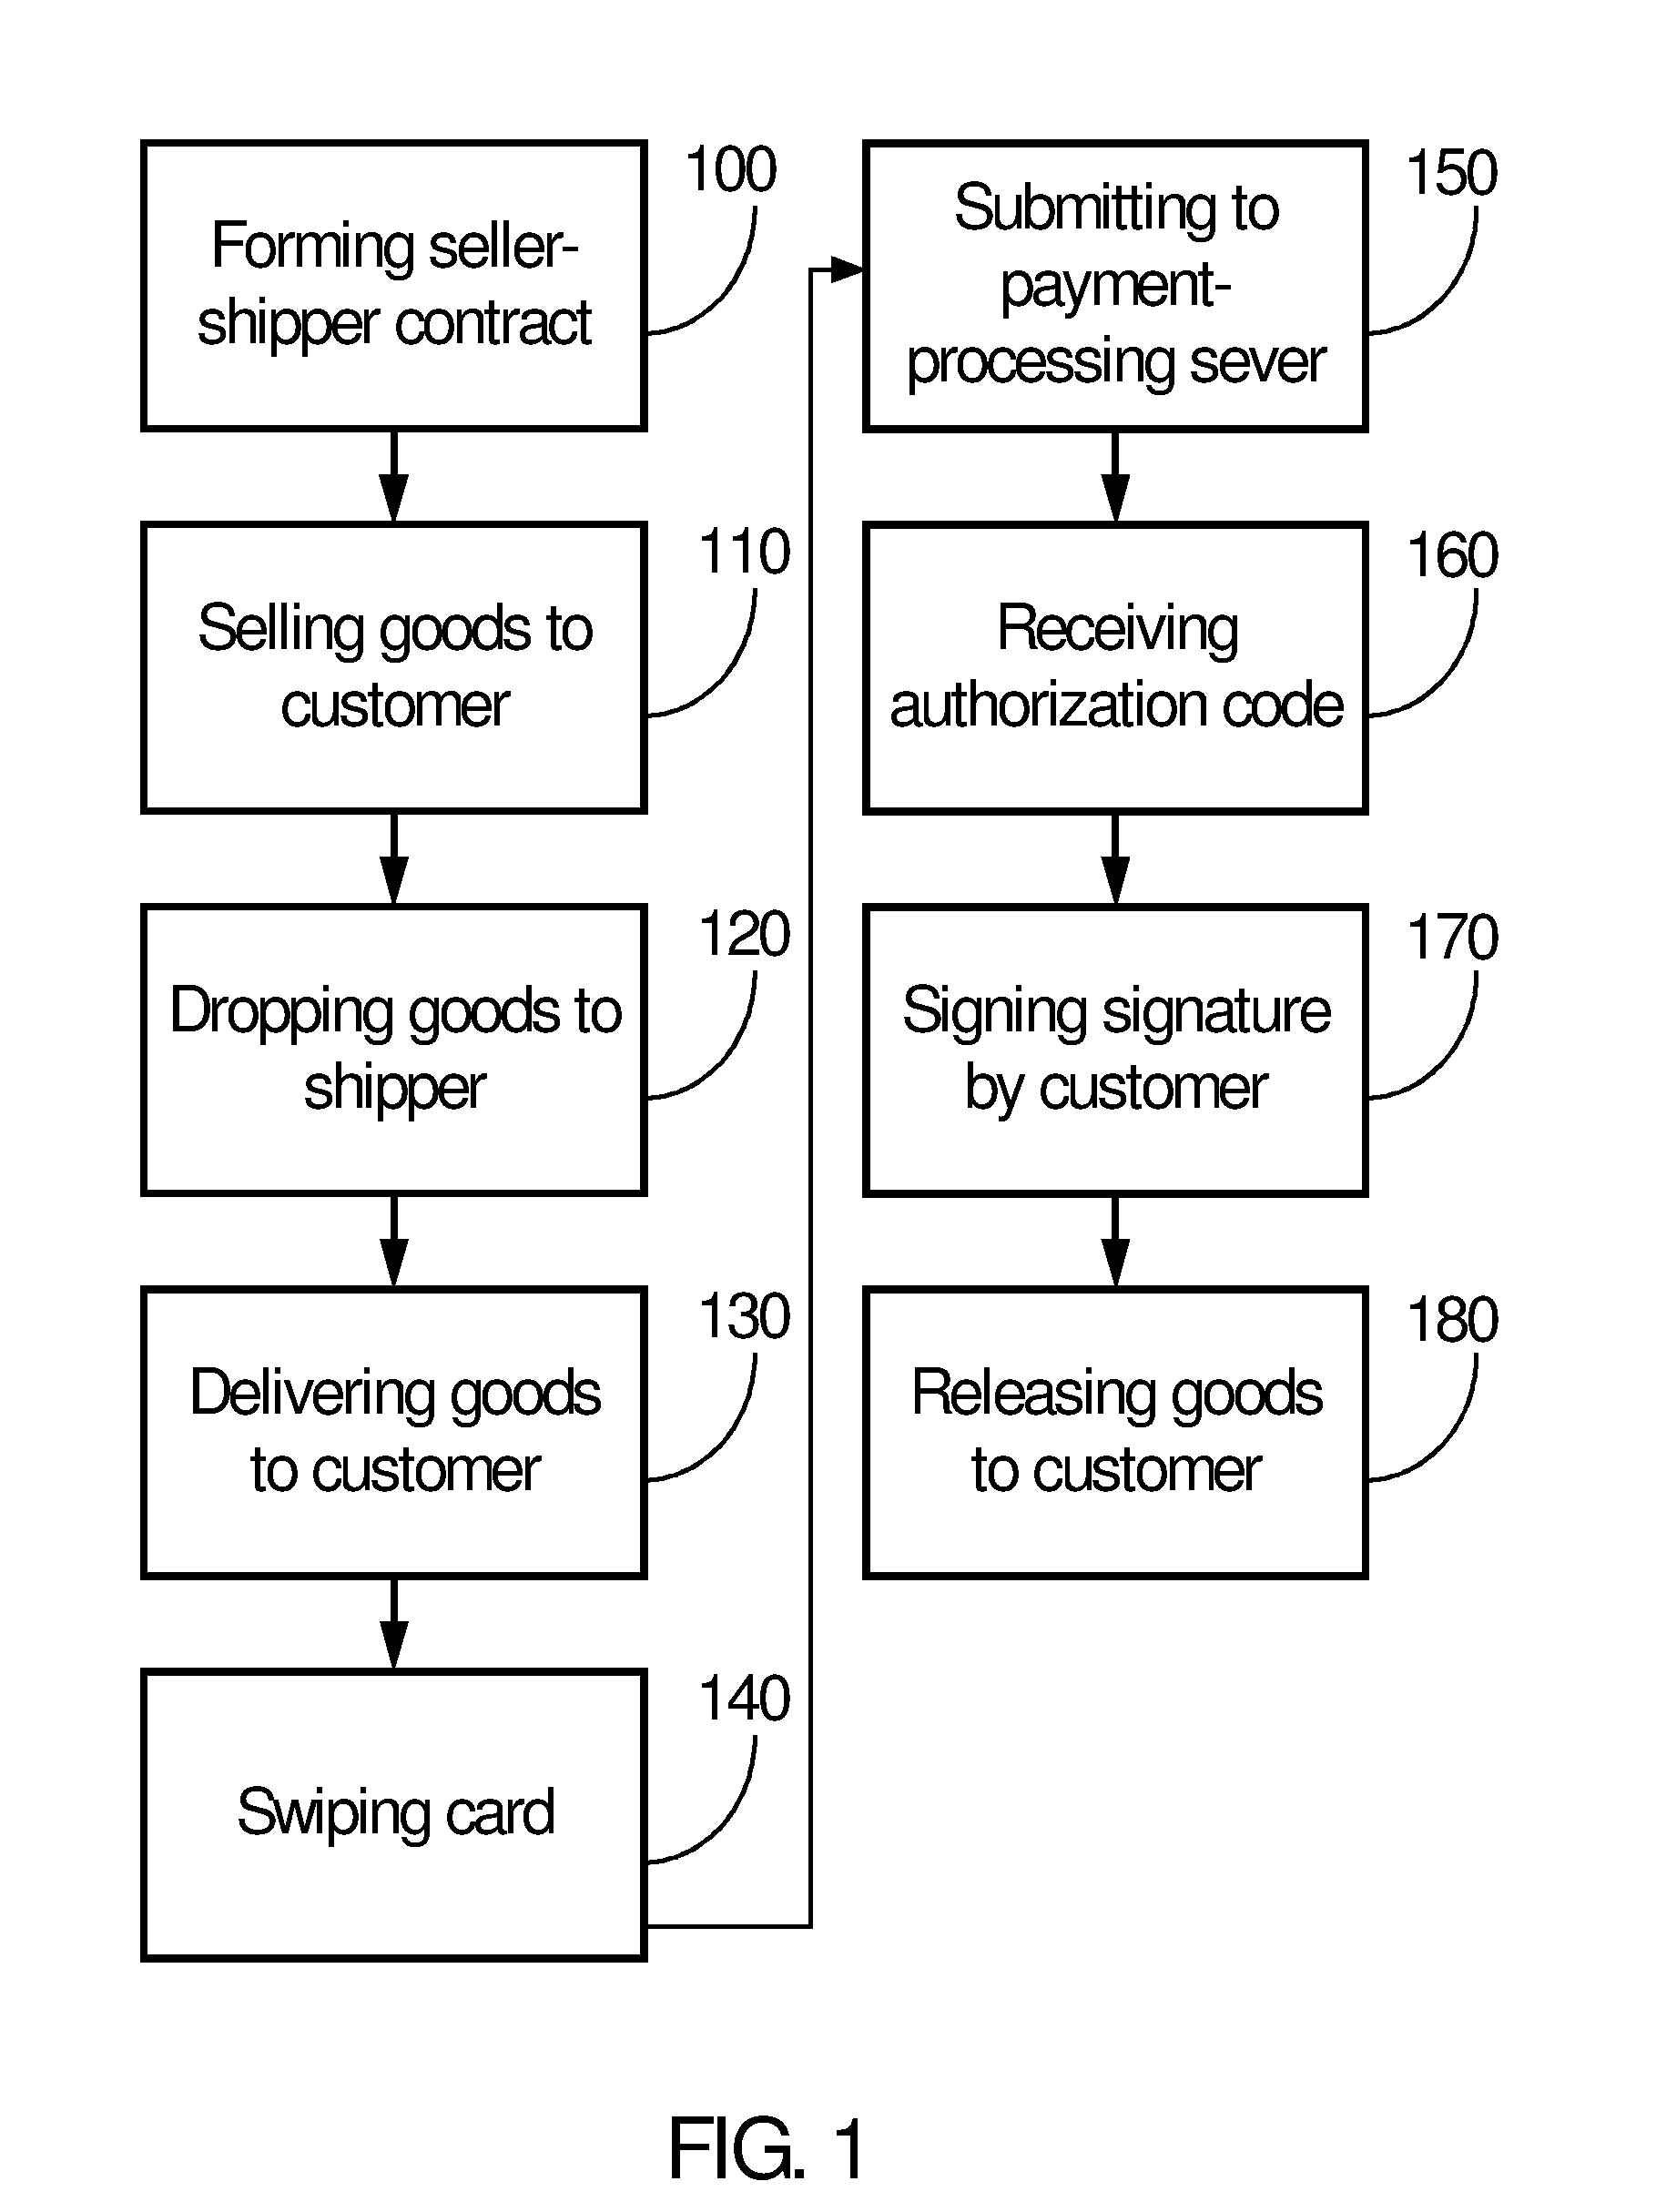 Method of processing credit payments at delivery